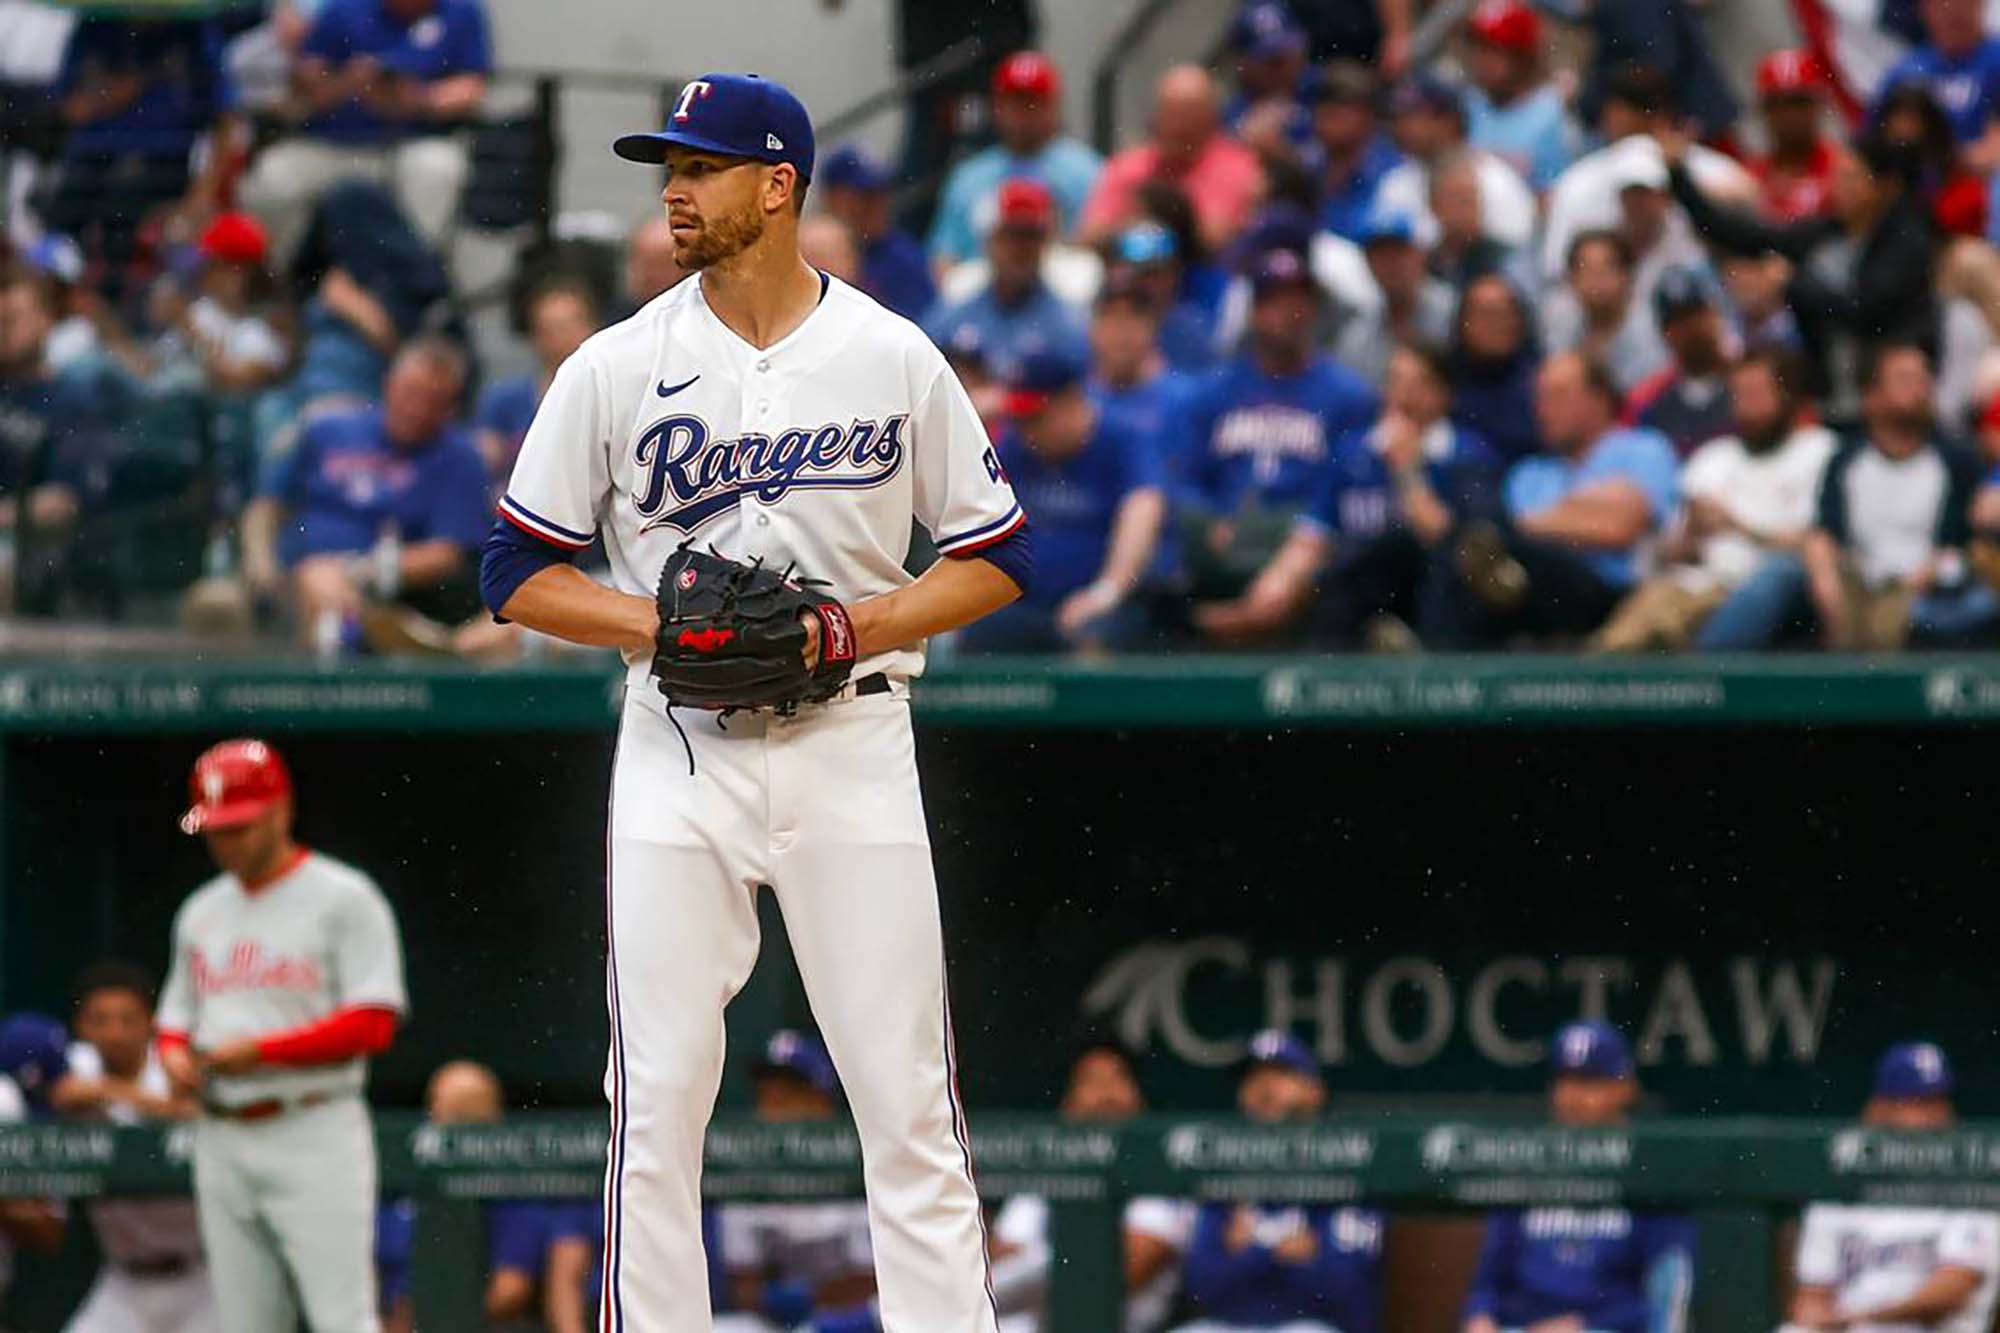 Texas Rangers on the clock to sign Yu Darvish